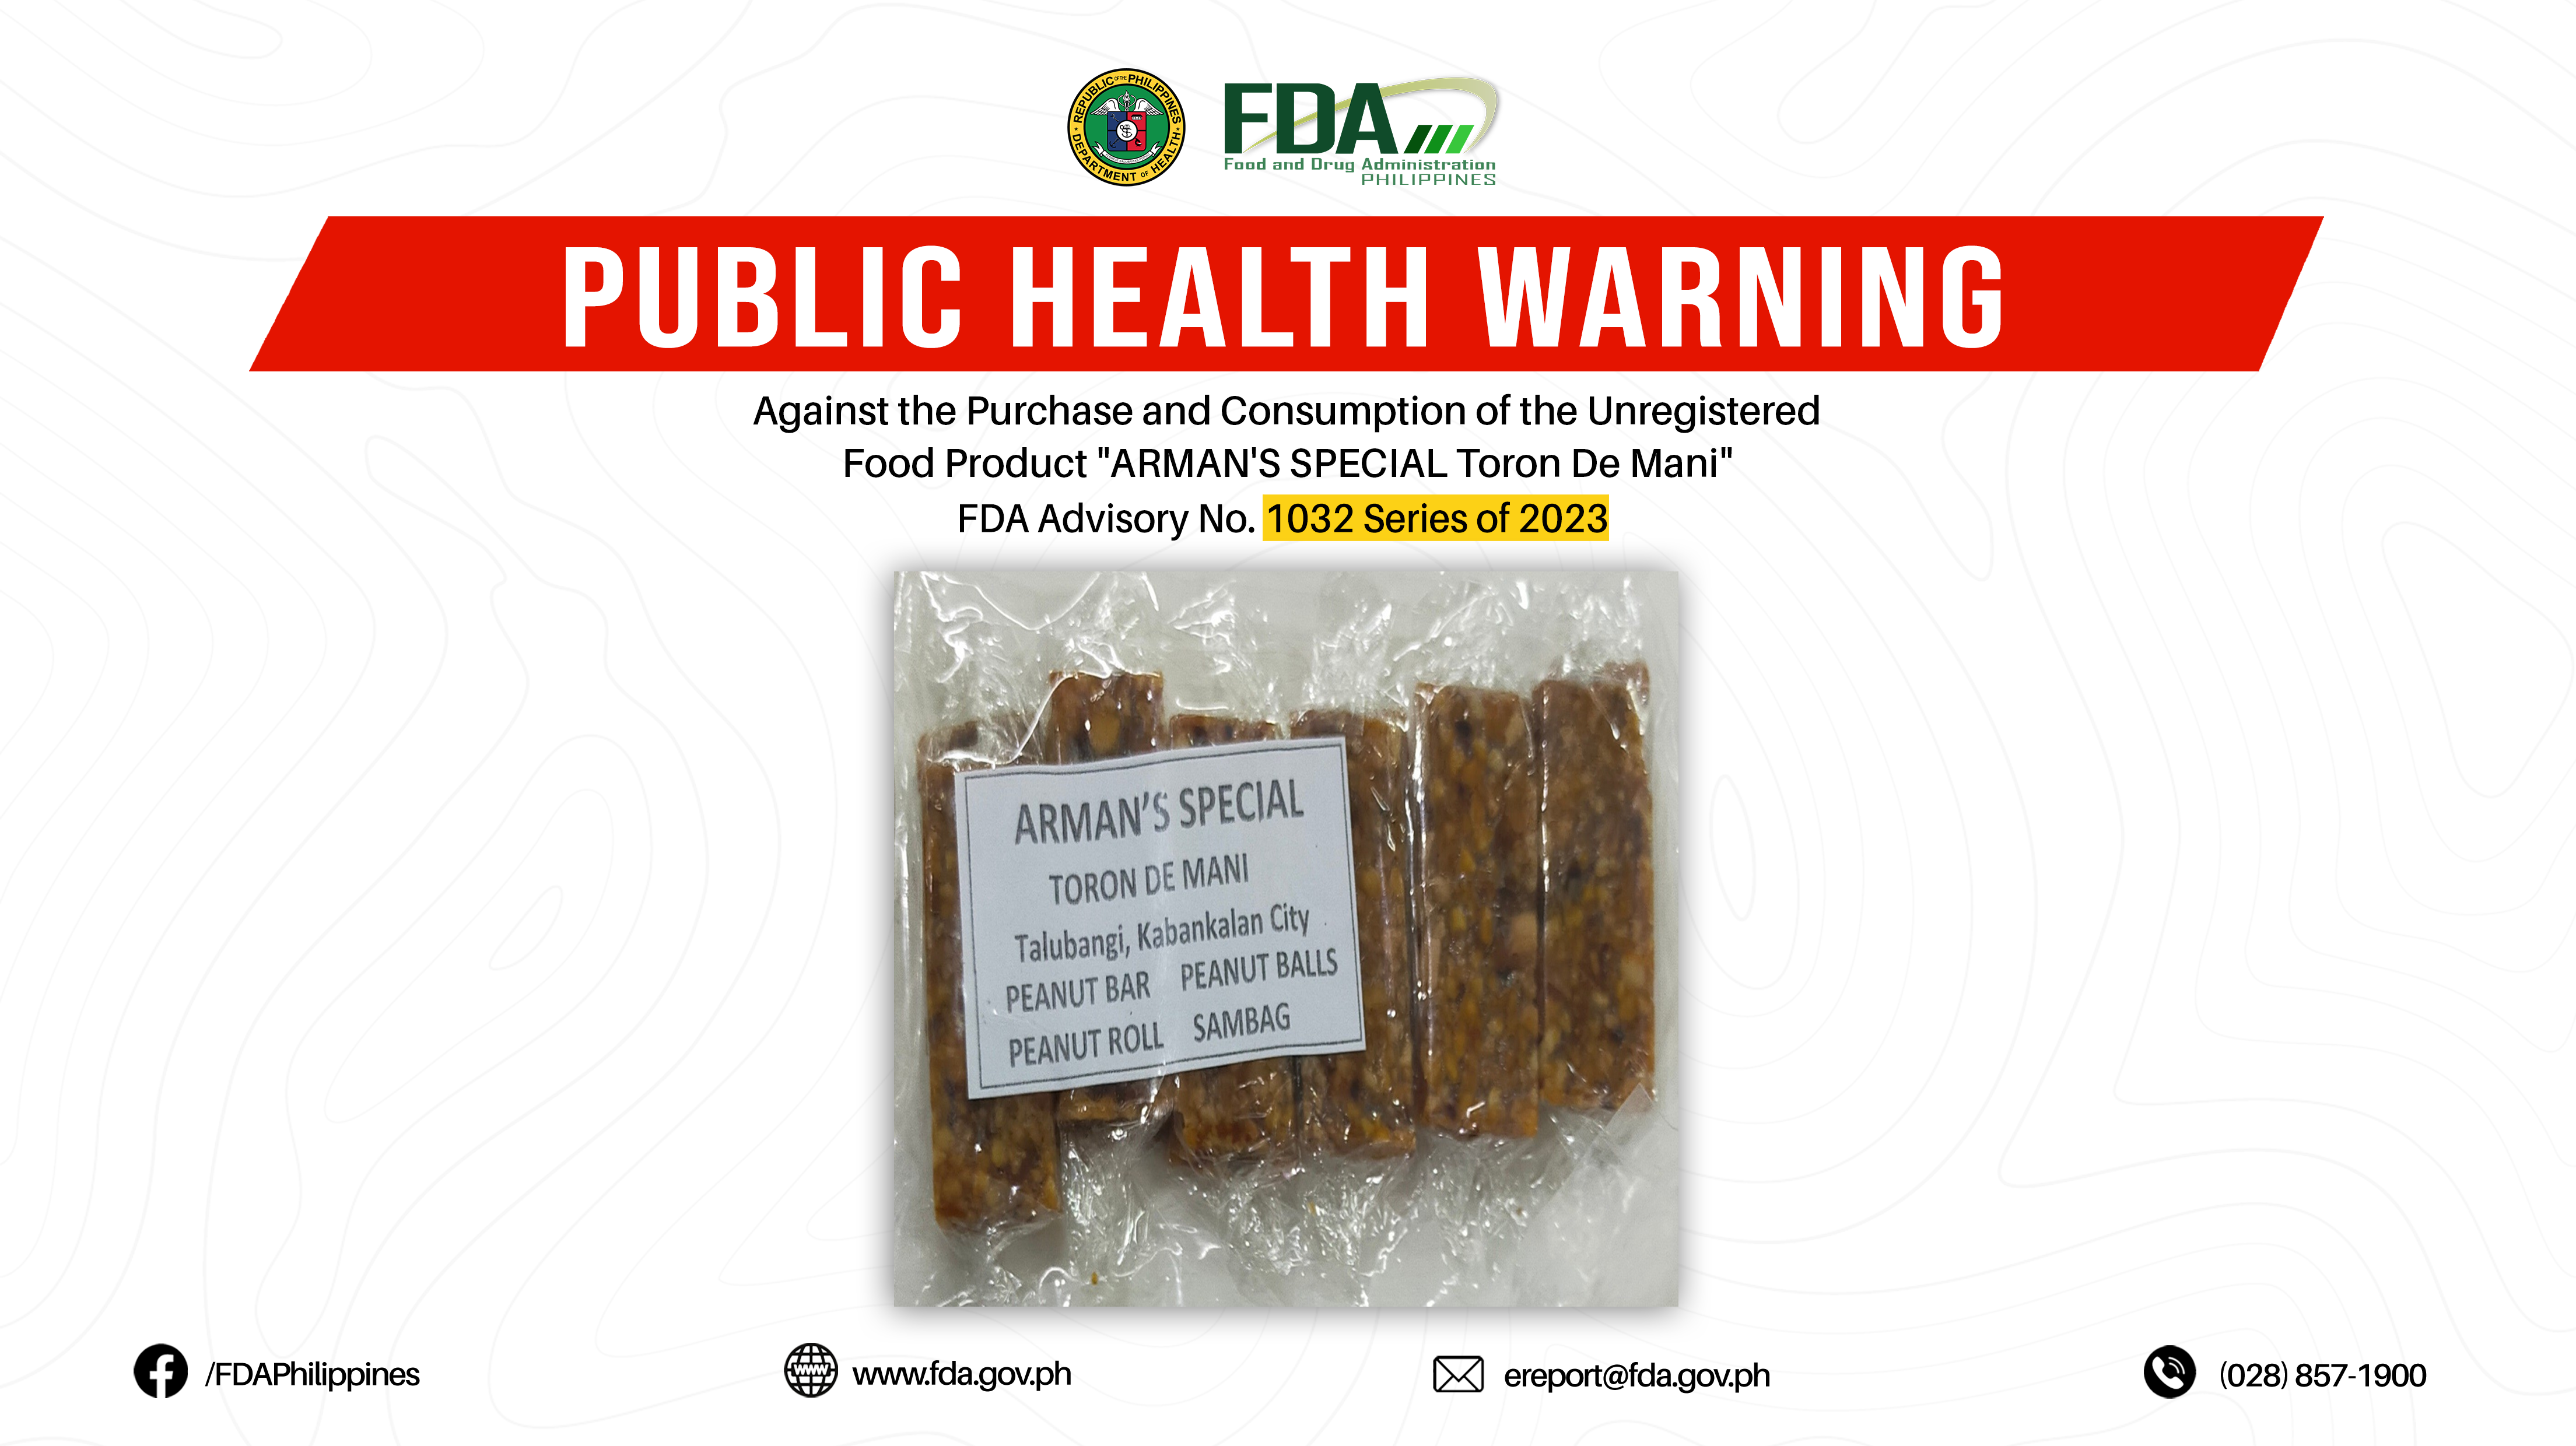 FDA Advisory No.2023-1032 || Public Health Warning Against the Purchase and Consumption of the Unregistered Food Product “ARMAN’S SPECIAL Toron De Mani”